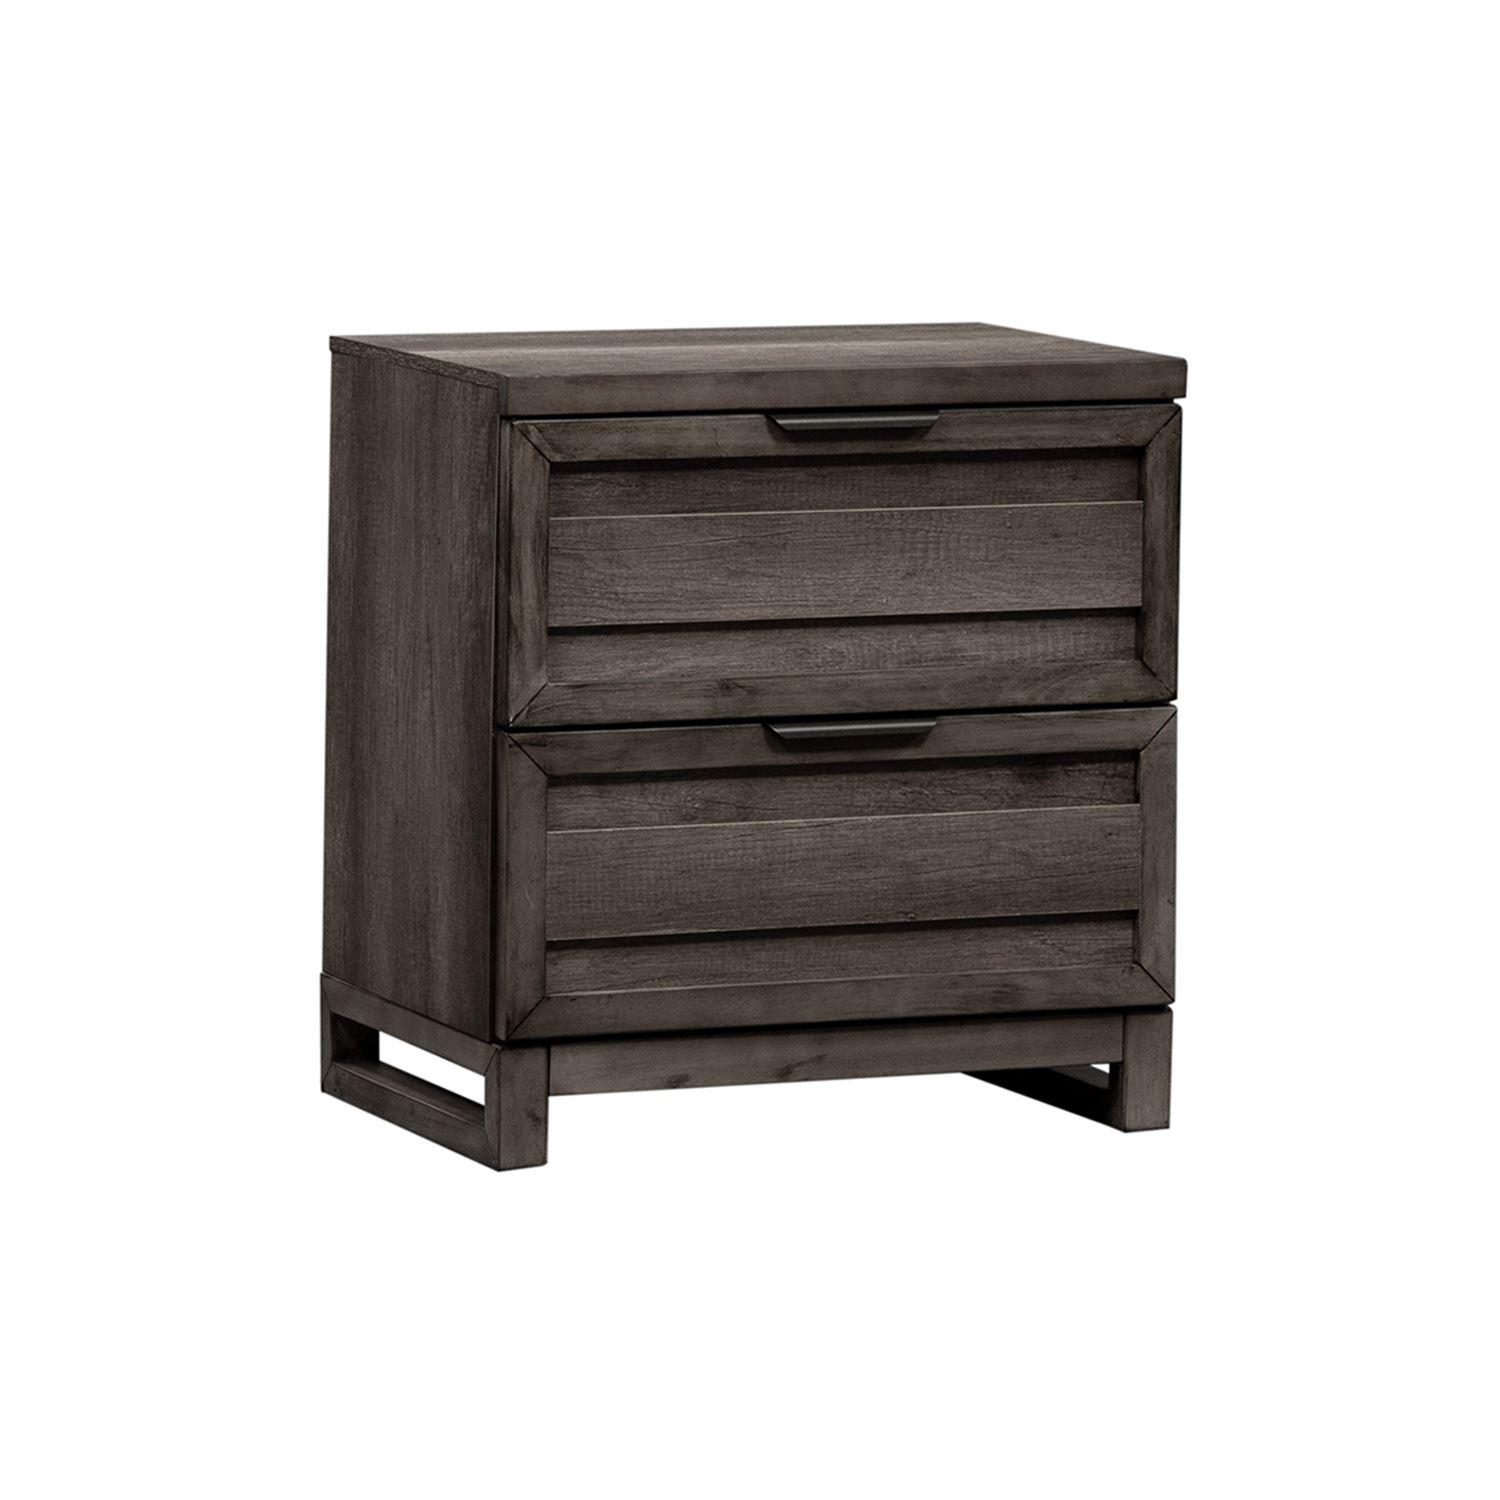 Contemporary Nightstand Tanners Creek  (686-BR) Nightstand 686-BR61 in Gray 